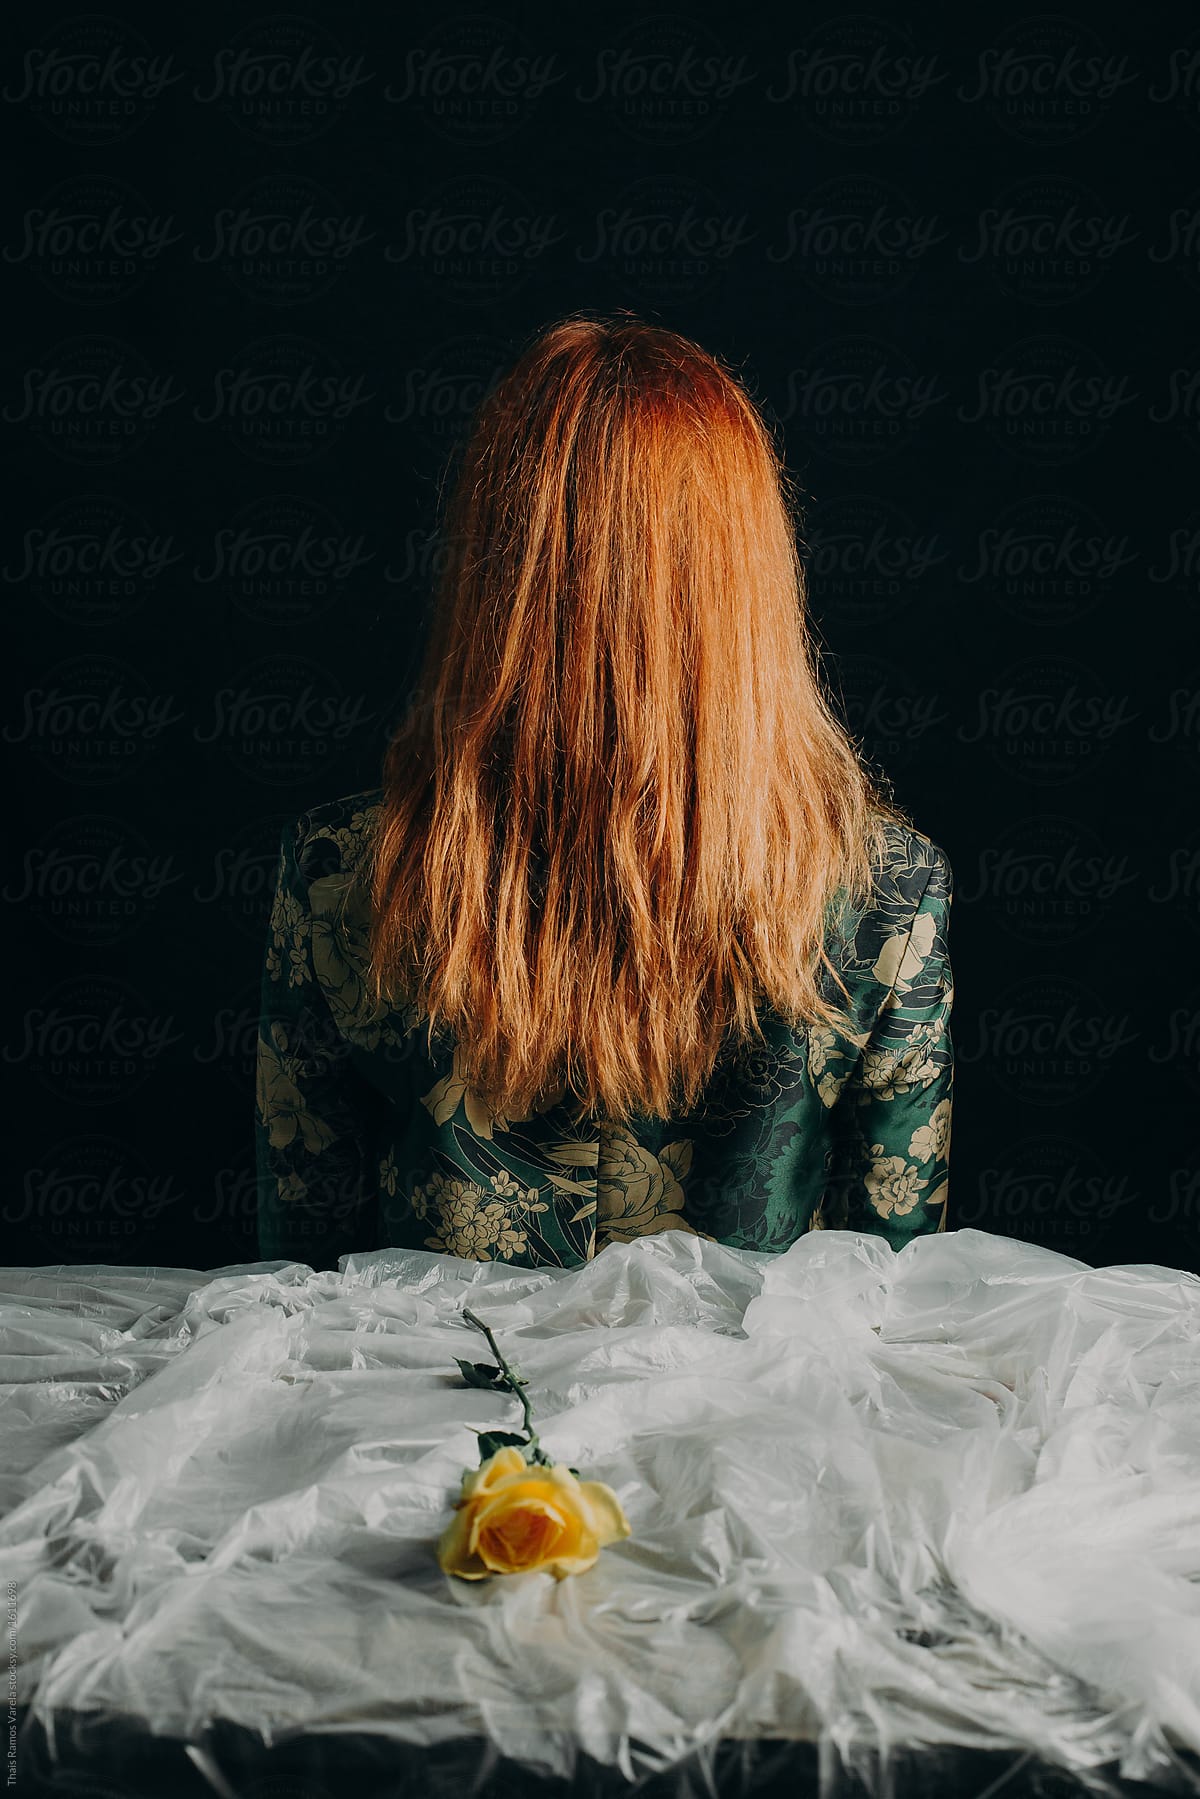 Ginger Woman Backward With A Yellow Rose On The Plastic Tablecloth By Stocksy Contributor